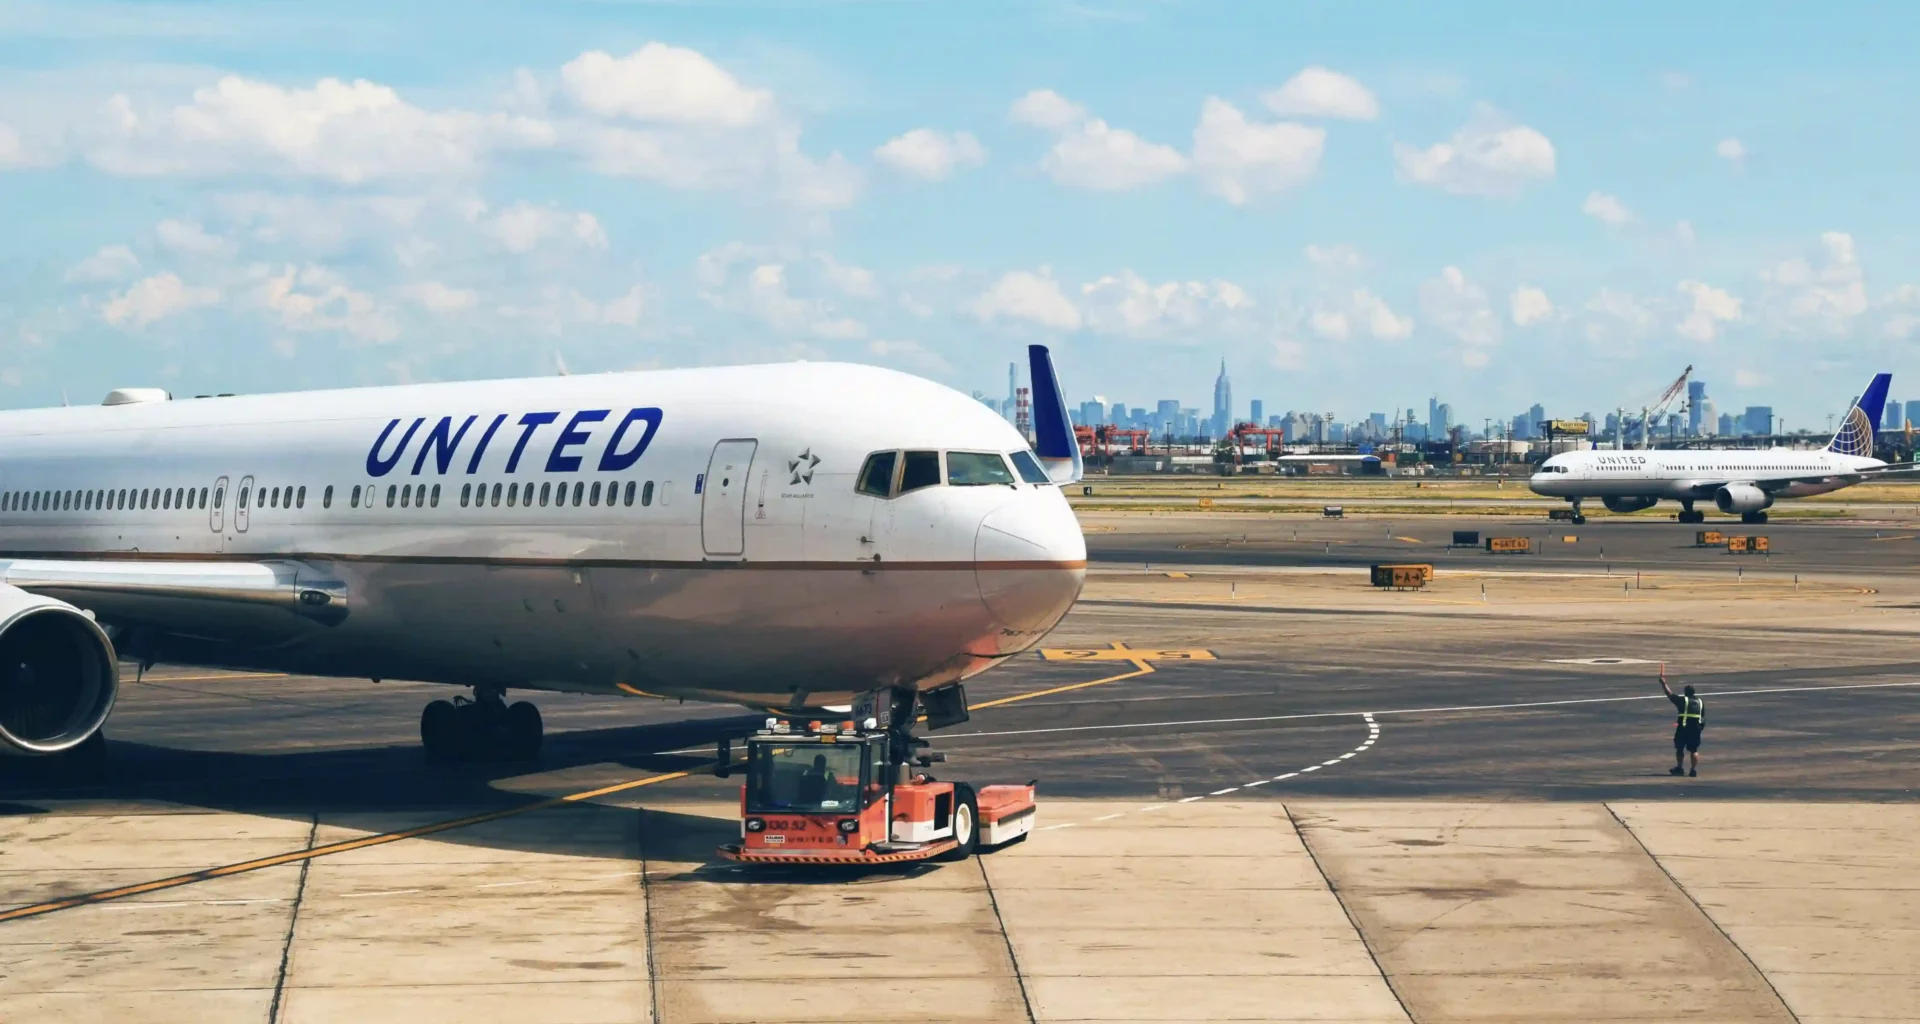 United airlines plane